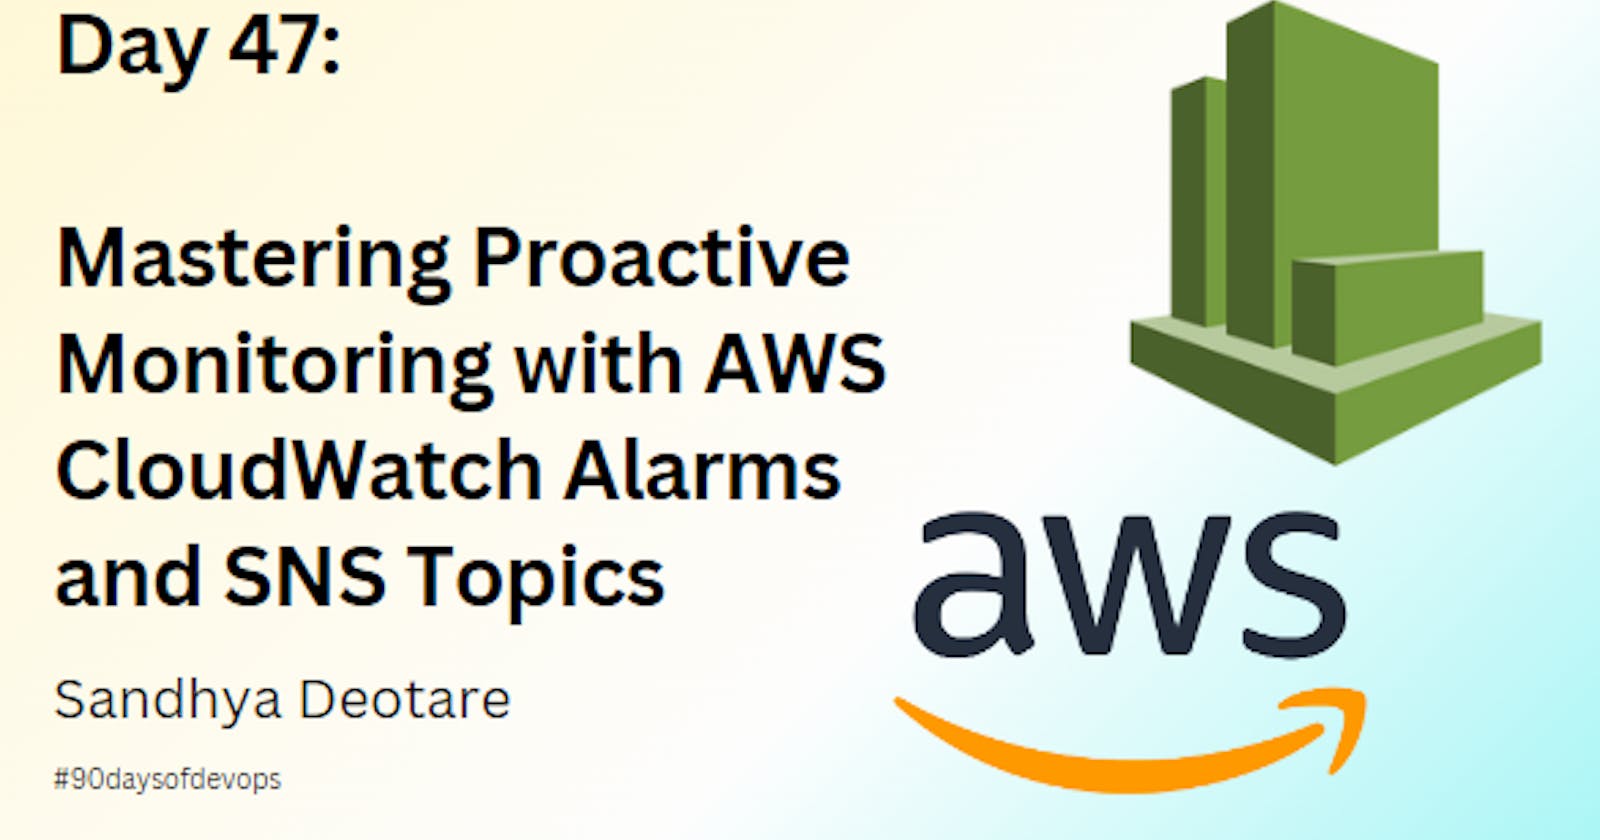 Mastering Proactive Monitoring with AWS CloudWatch Alarms and SNS Topics